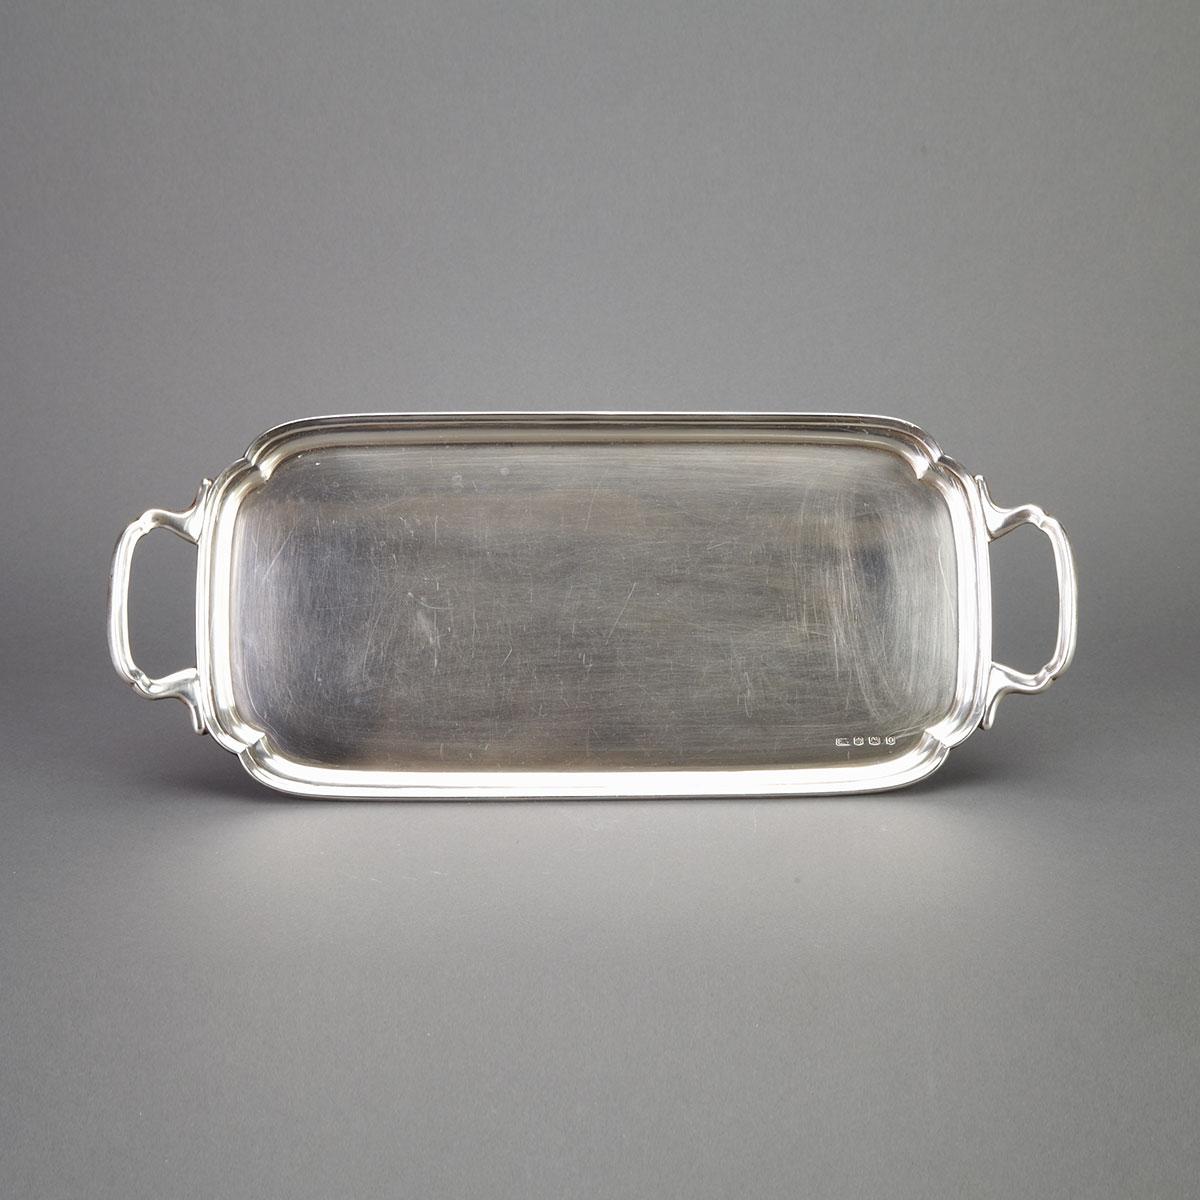 English Silver Two-Handled Cocktail Tray, Viner's Ltd, Sheffield, 1931